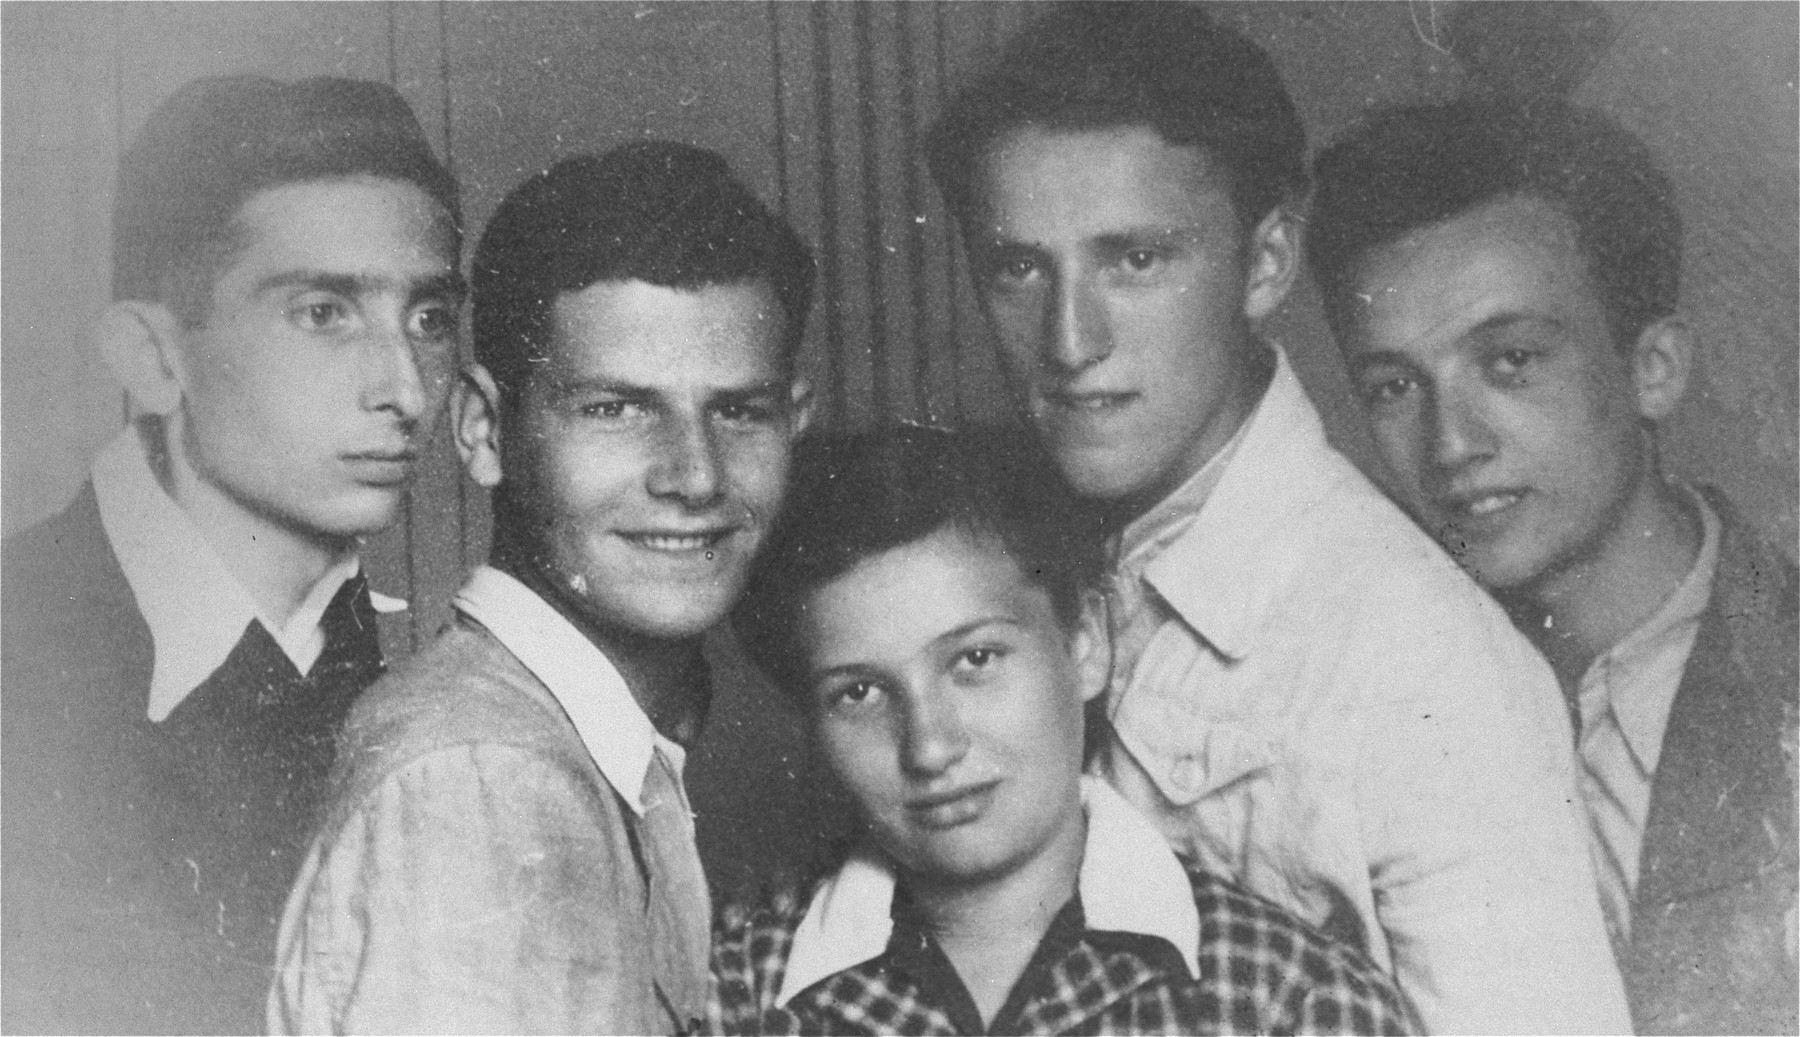 A group of Jewish youth in the Borislaw ghetto.

Pictured from left to right are: Rolek  (Raoul) Harmelin, Ducek Egit, Imek Eisenstein, Sabina Haberman and Jurek Haberman.  

Jurek  was shot by the Germans in the Borislaw labor camp on July 19, 1944, just three weeks before the arrival of the Red Army.   Rolek Harmelin survived the war and emigrated to Australia.